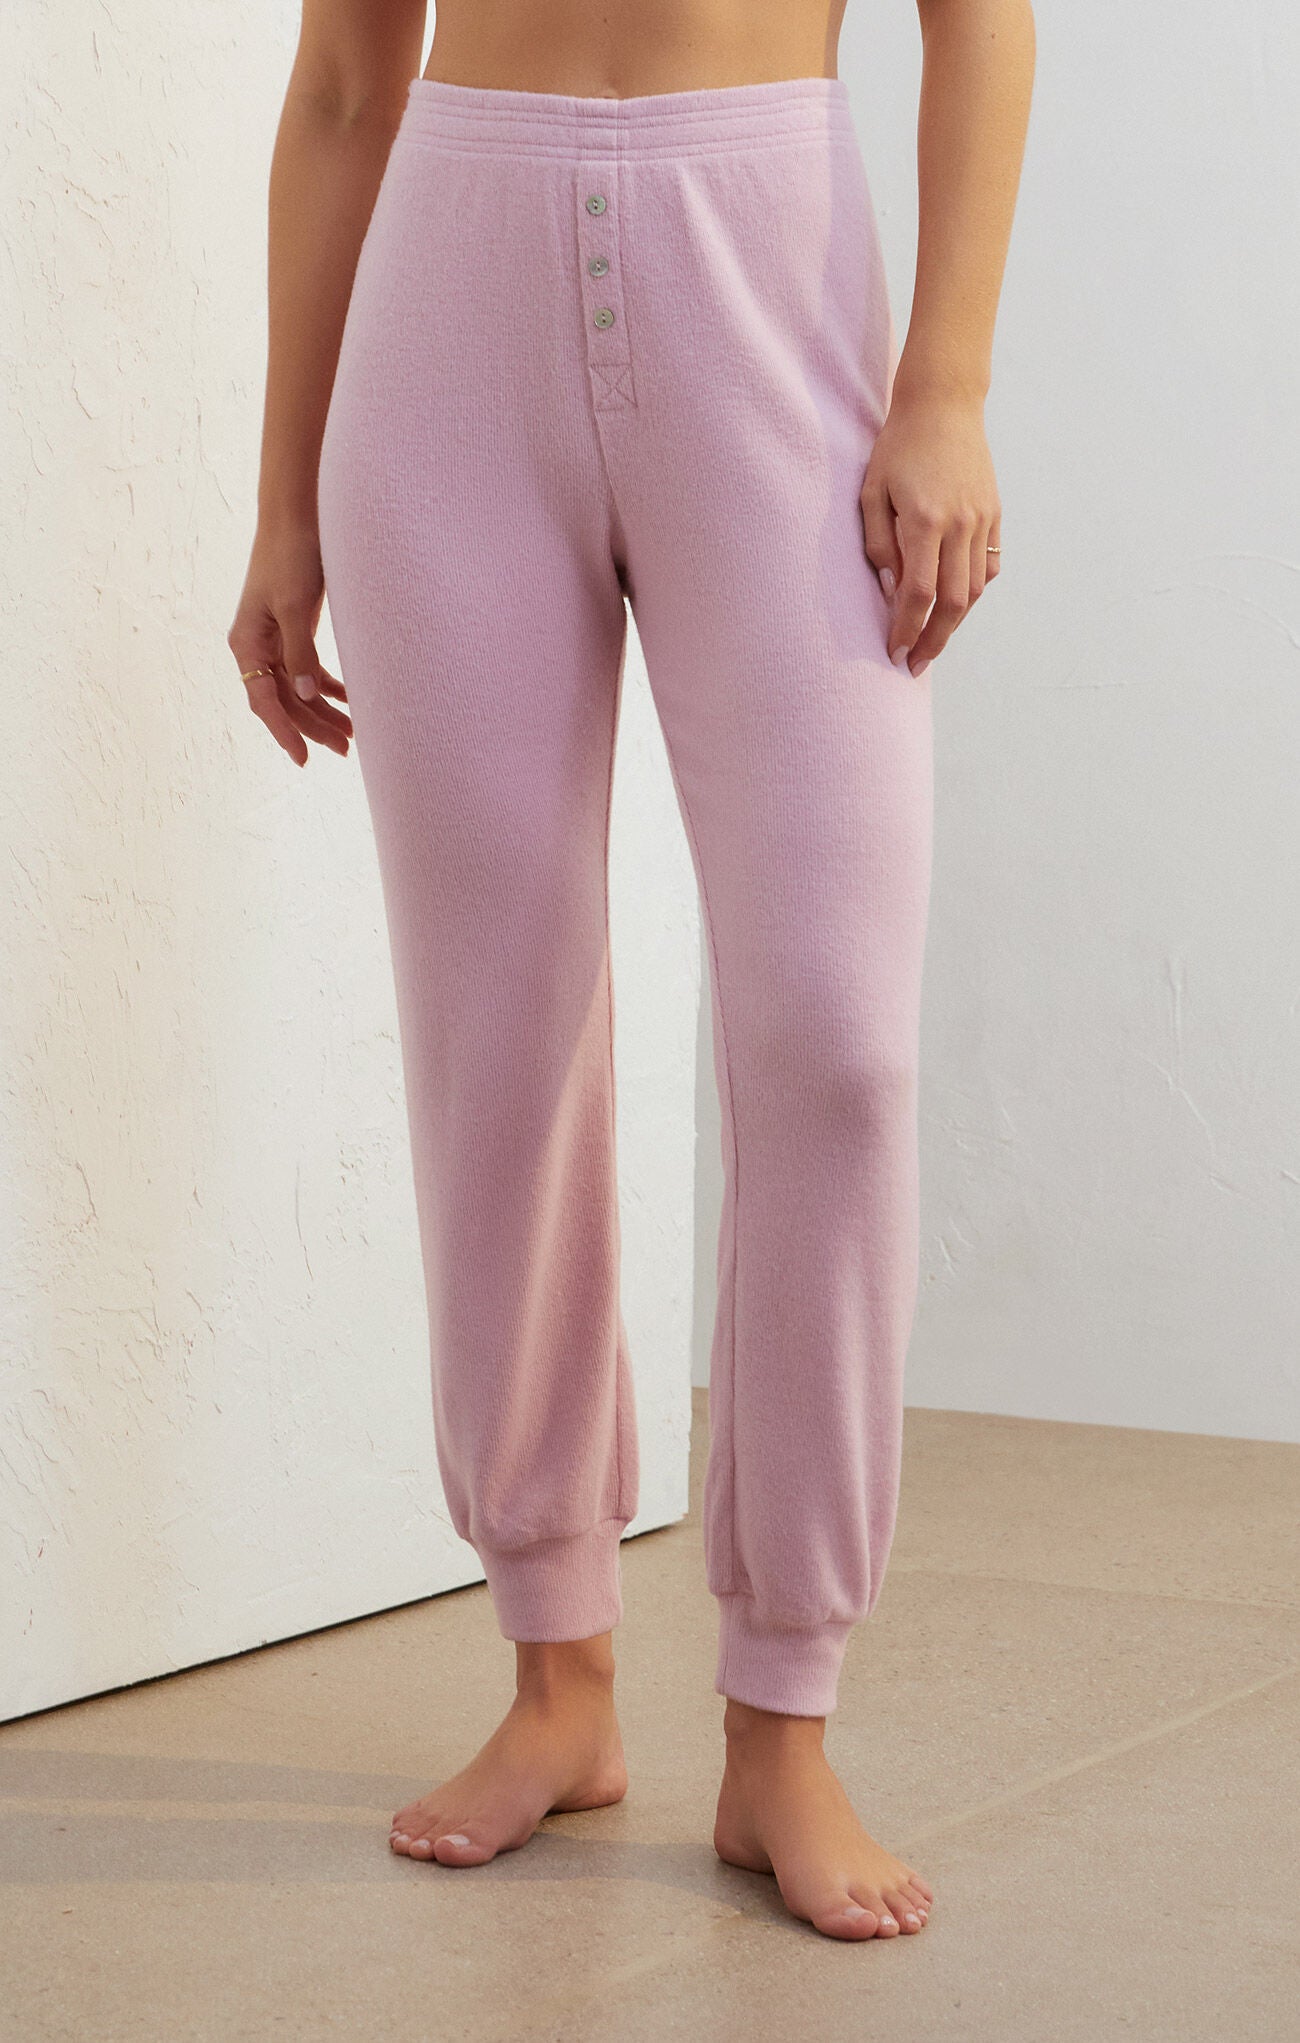 TAKE IT EASY RIB JOGGER-pink glaze,elastic waist,button detail on front,cuffed at ankles,pajama bottom